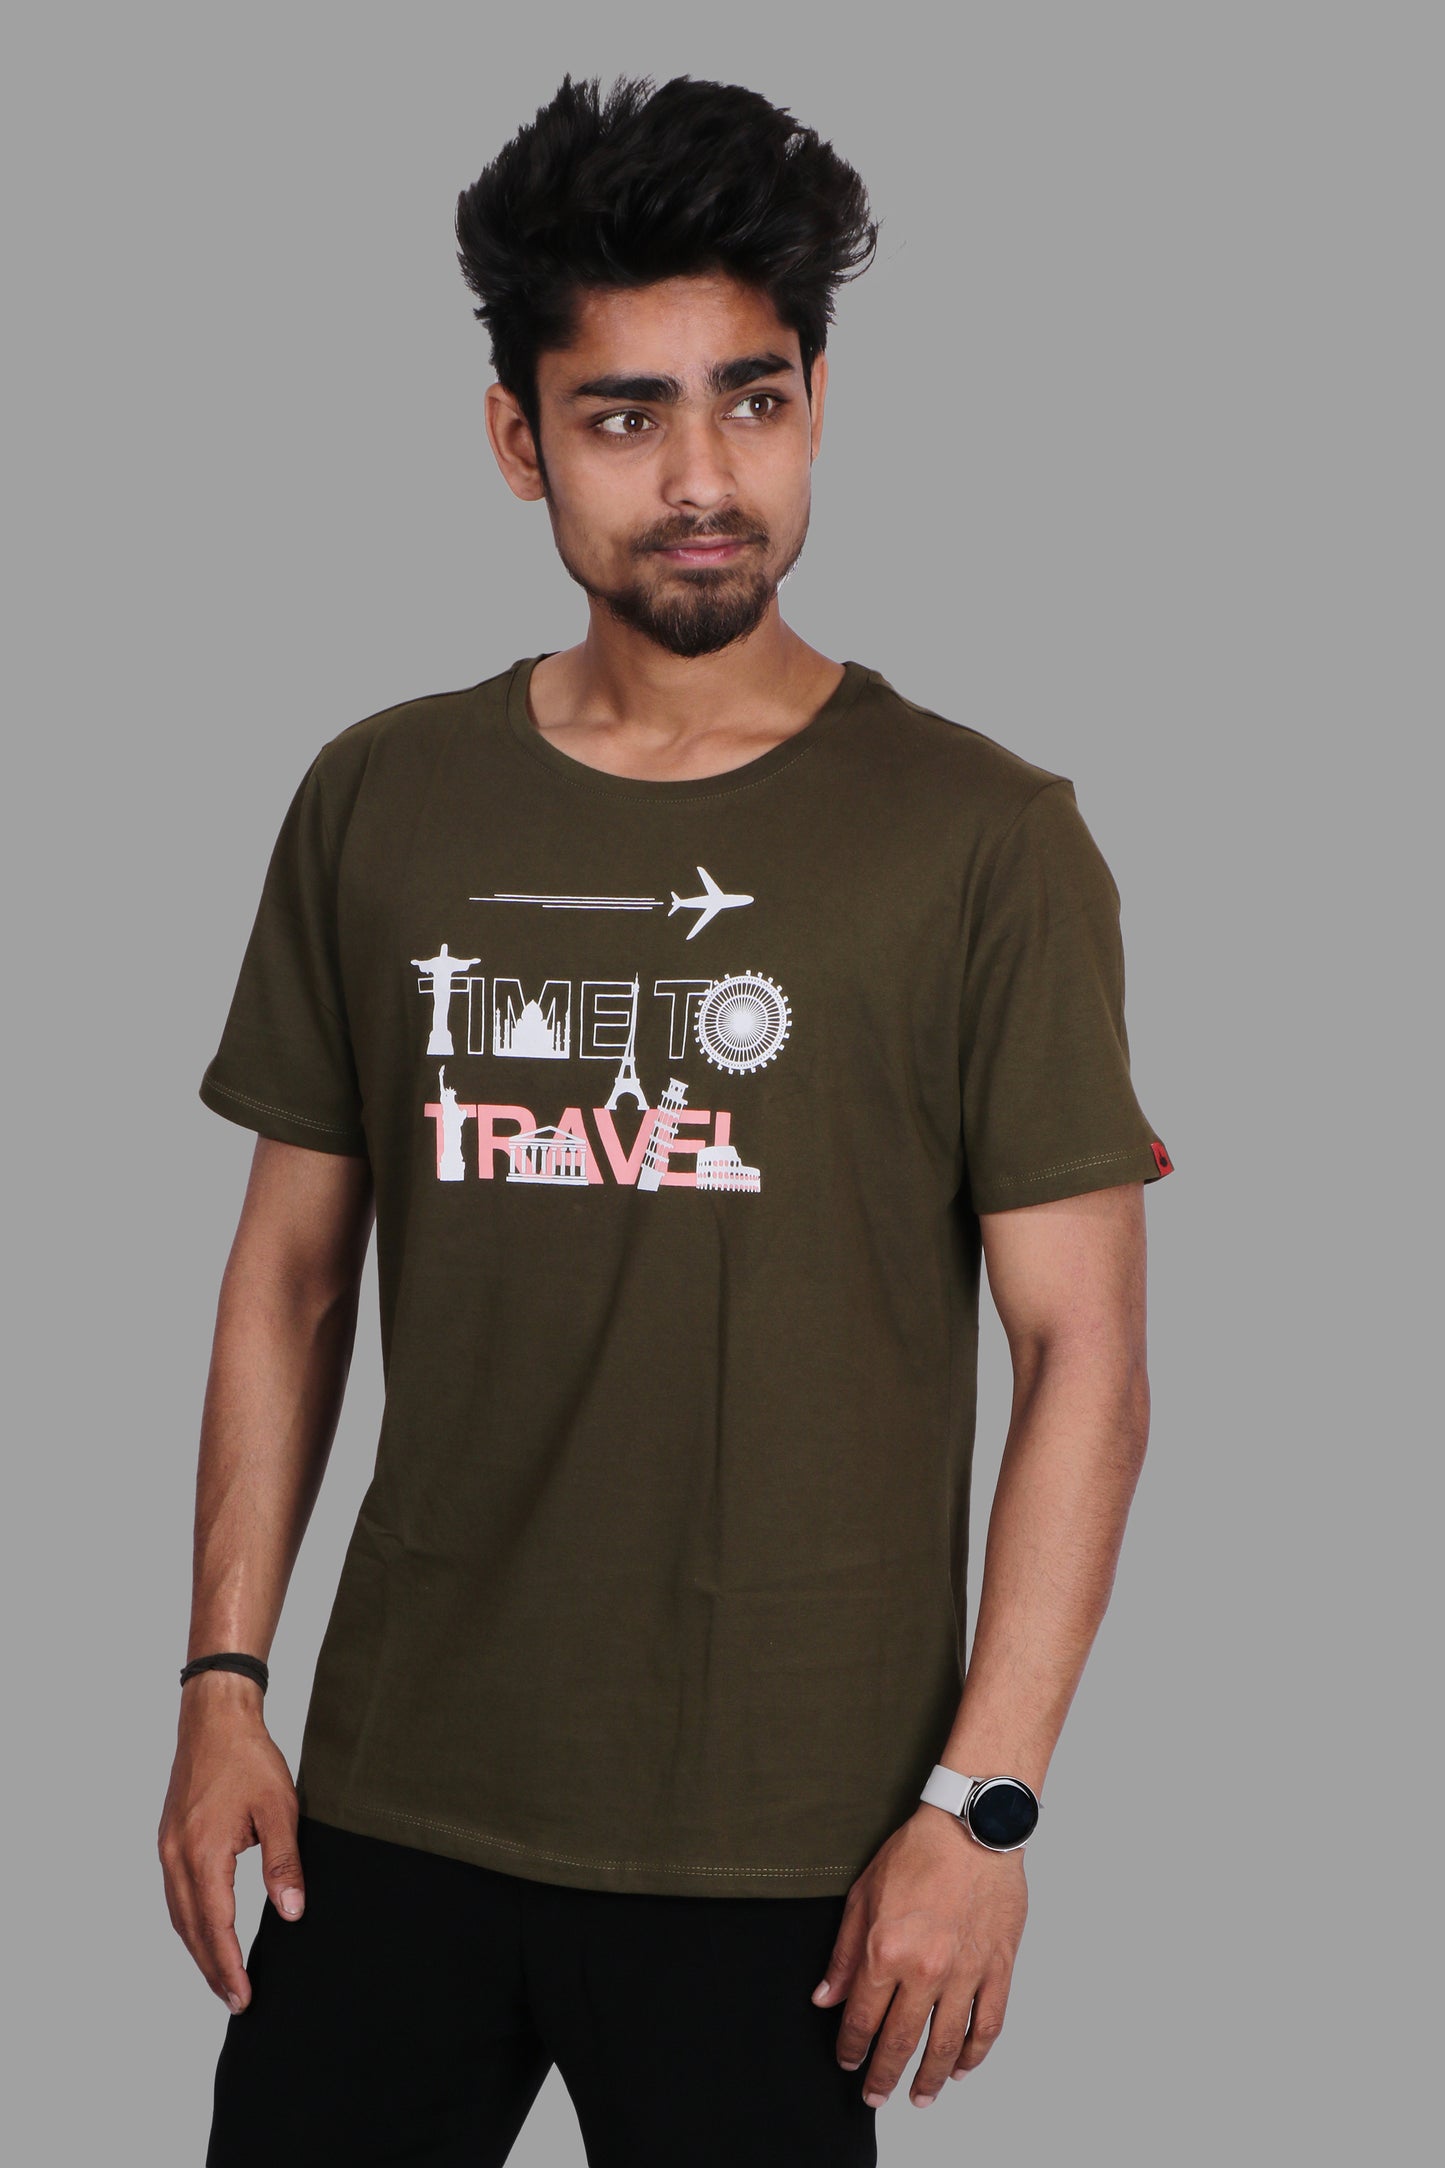 TIME TO TRAVEL OLIVE T-SHIRT (UNISEX FIT)